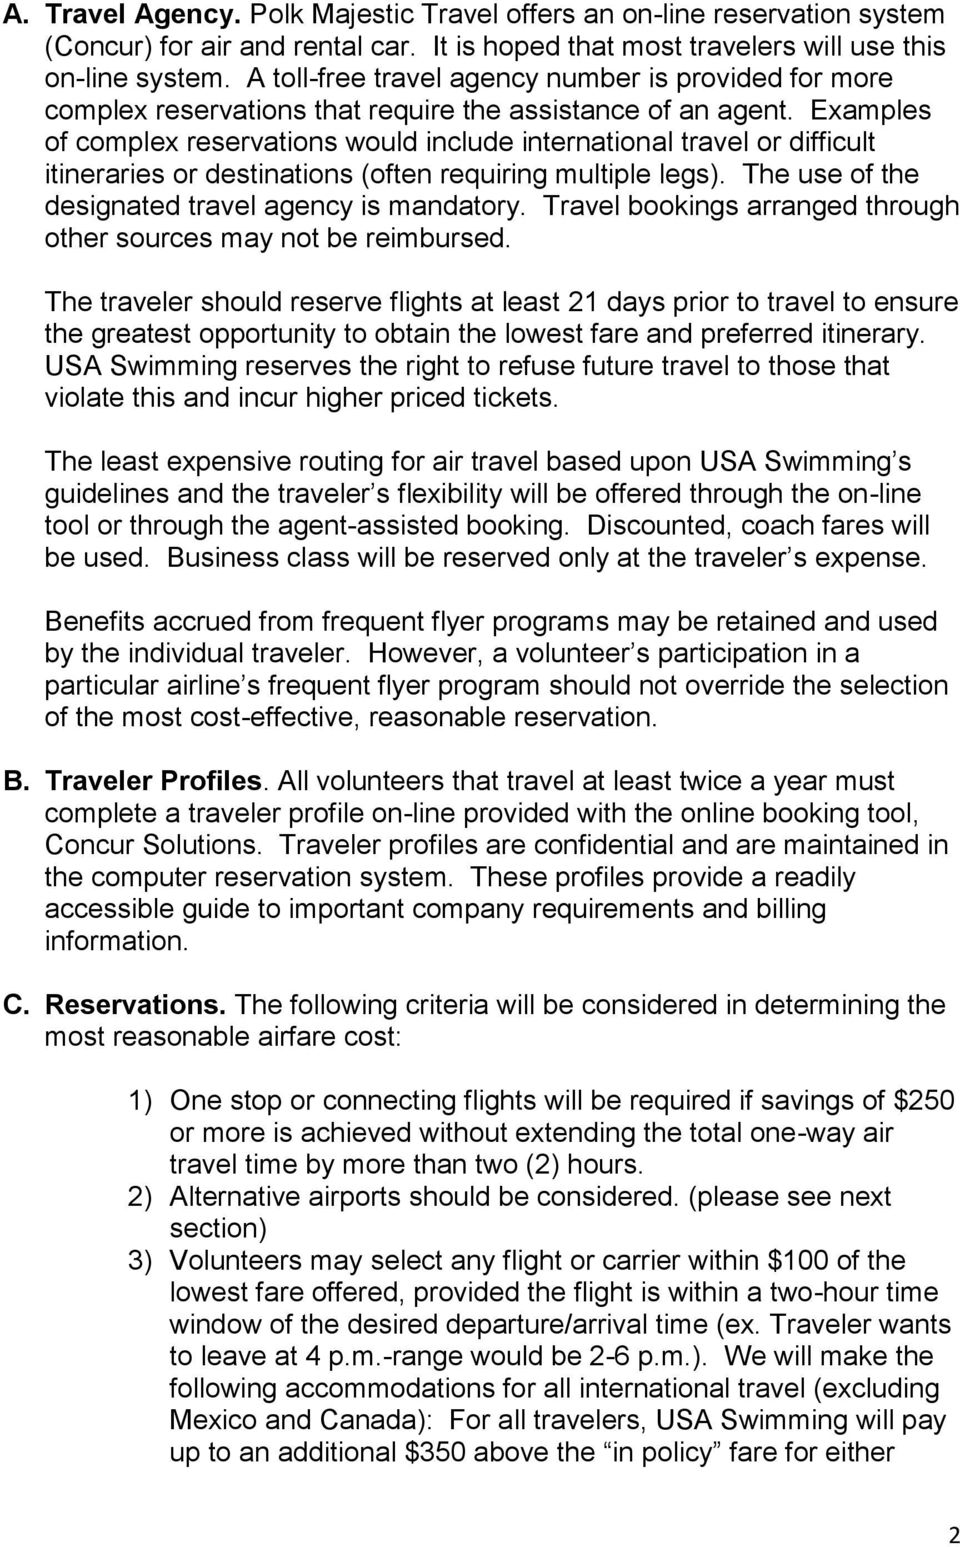 Examples of complex reservations would include international travel or difficult itineraries or destinations (often requiring multiple legs). The use of the designated travel agency is mandatory.